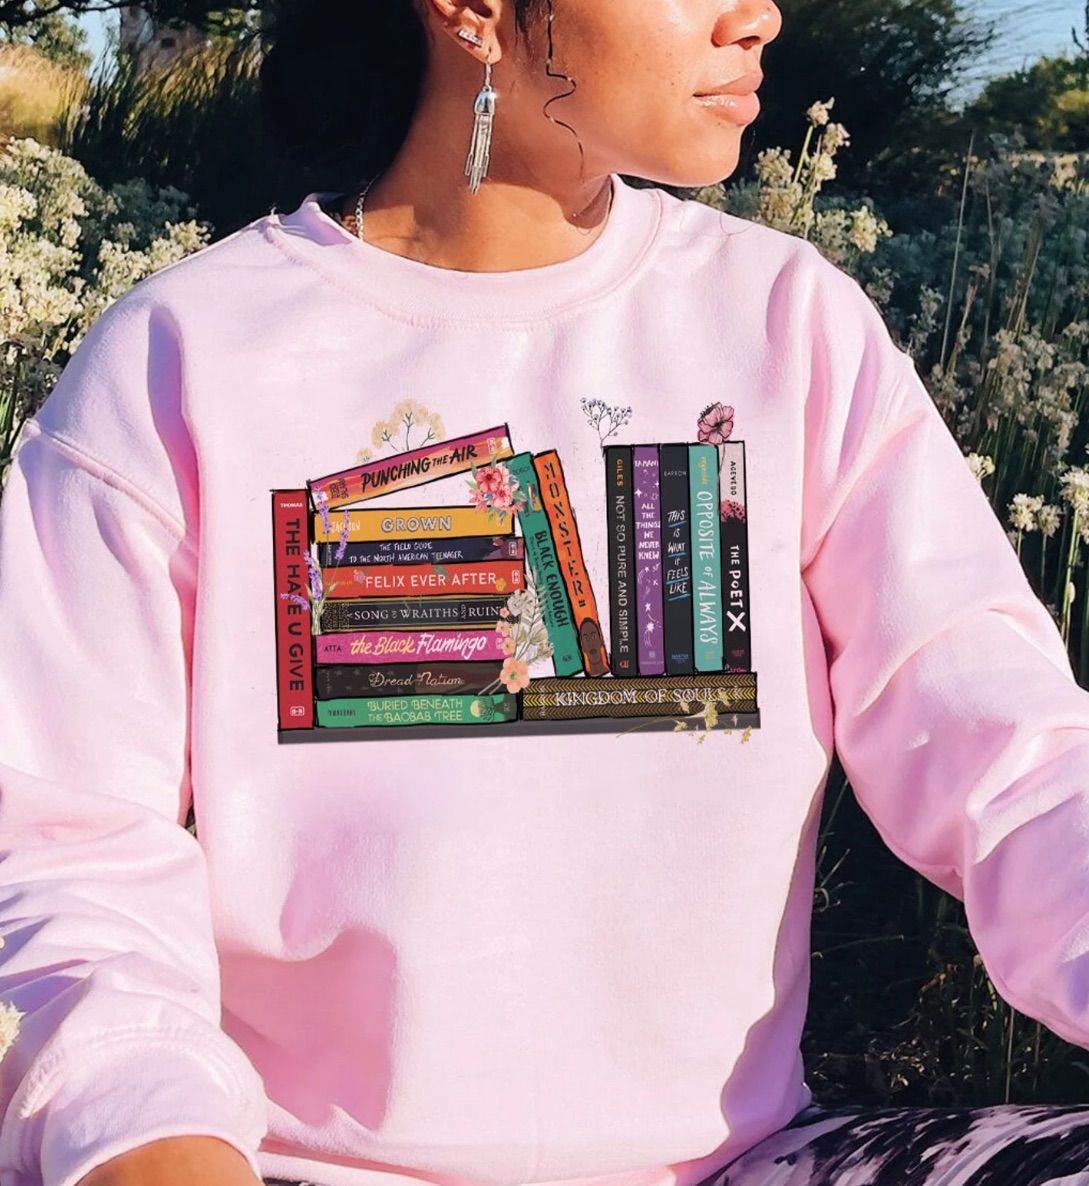 Image of a Black woman wearing a pink sweatshirt. The shirt has several Black YA book spines on it. 